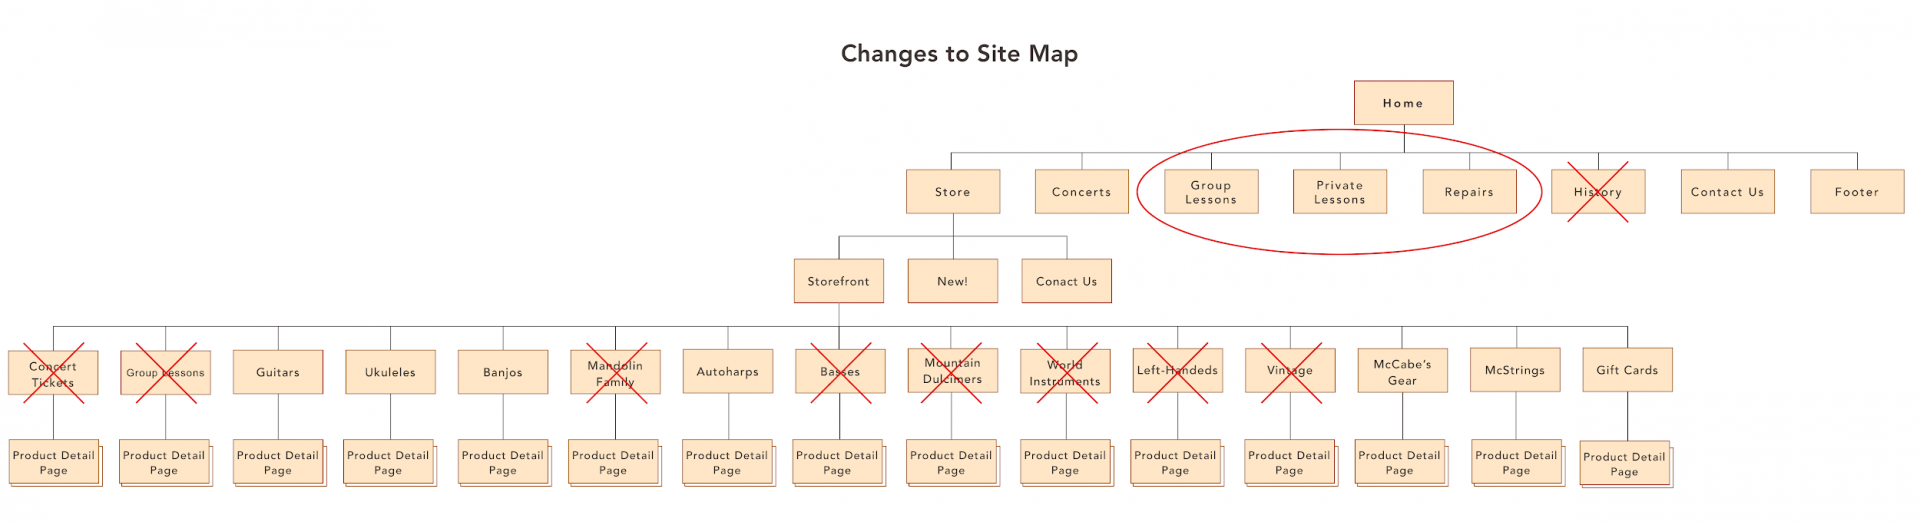 Highlight changes and recommendations to the site map within your UX case study to clearly show your process. 